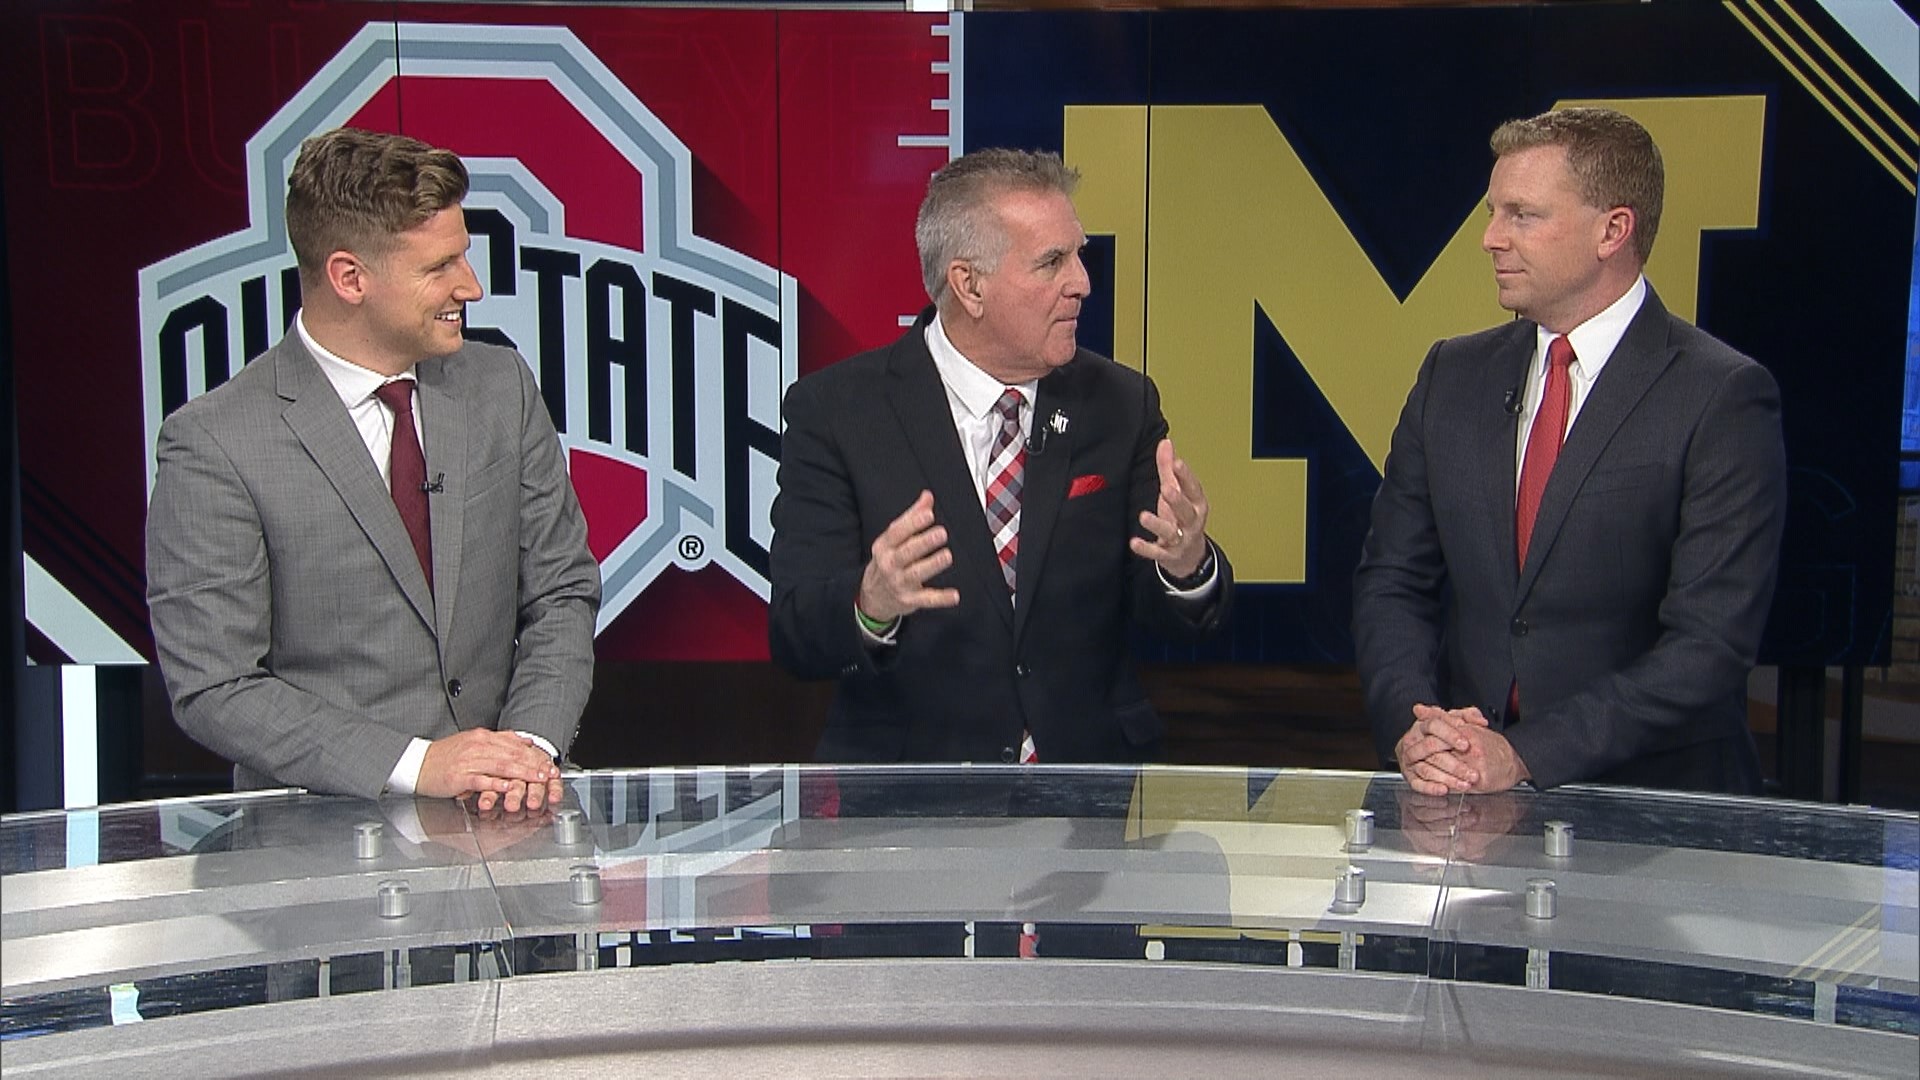 10TV's Adam King, Dom Tiberi and Dave Holmes look ahead to one of the biggest games of the season - the Ohio State-Michigan matchup.